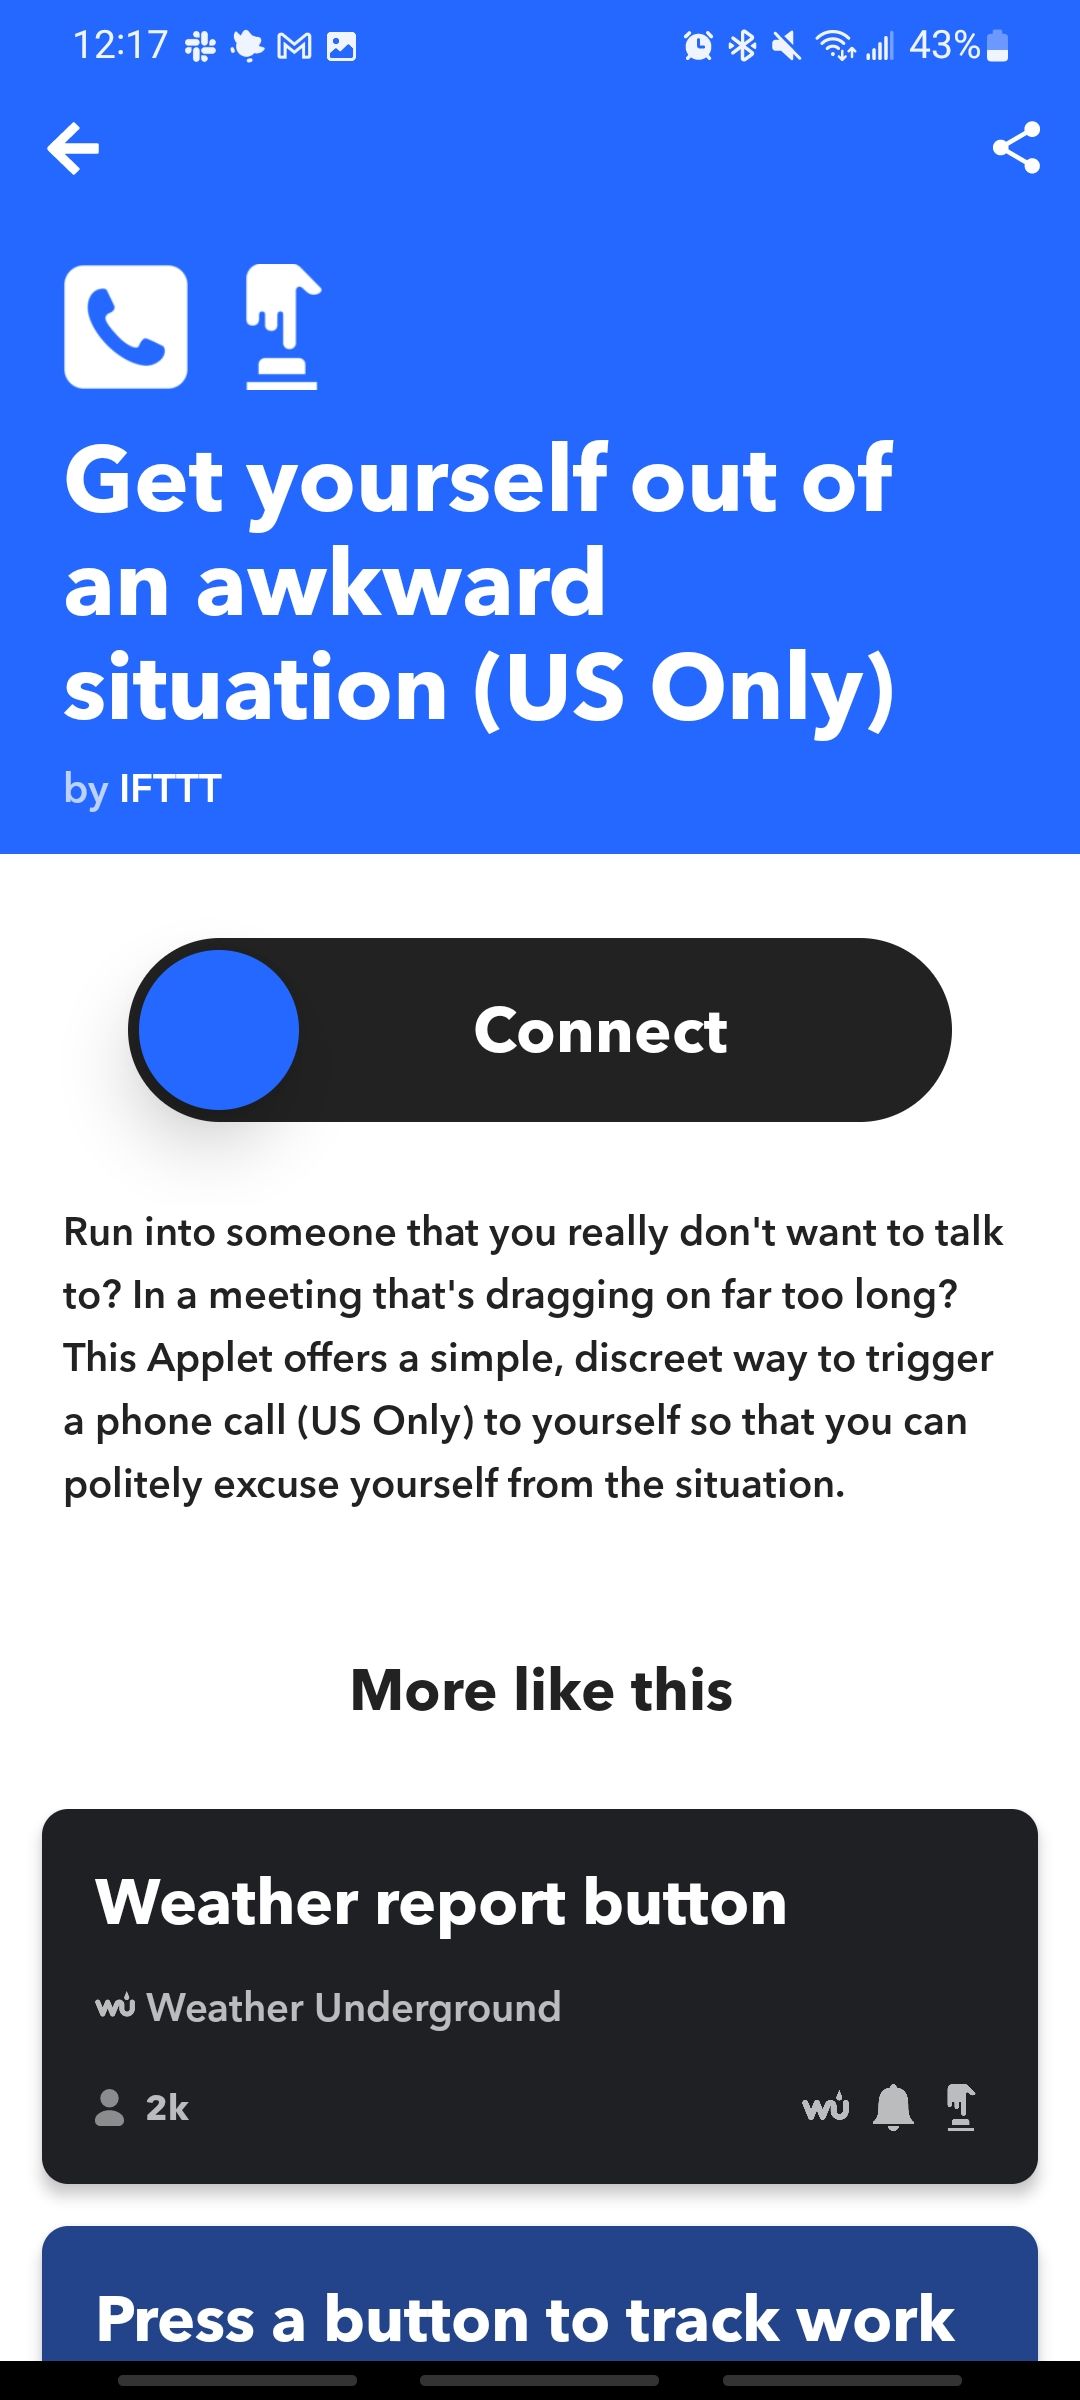 get yourself out of an awkward situation united states ifttt applet